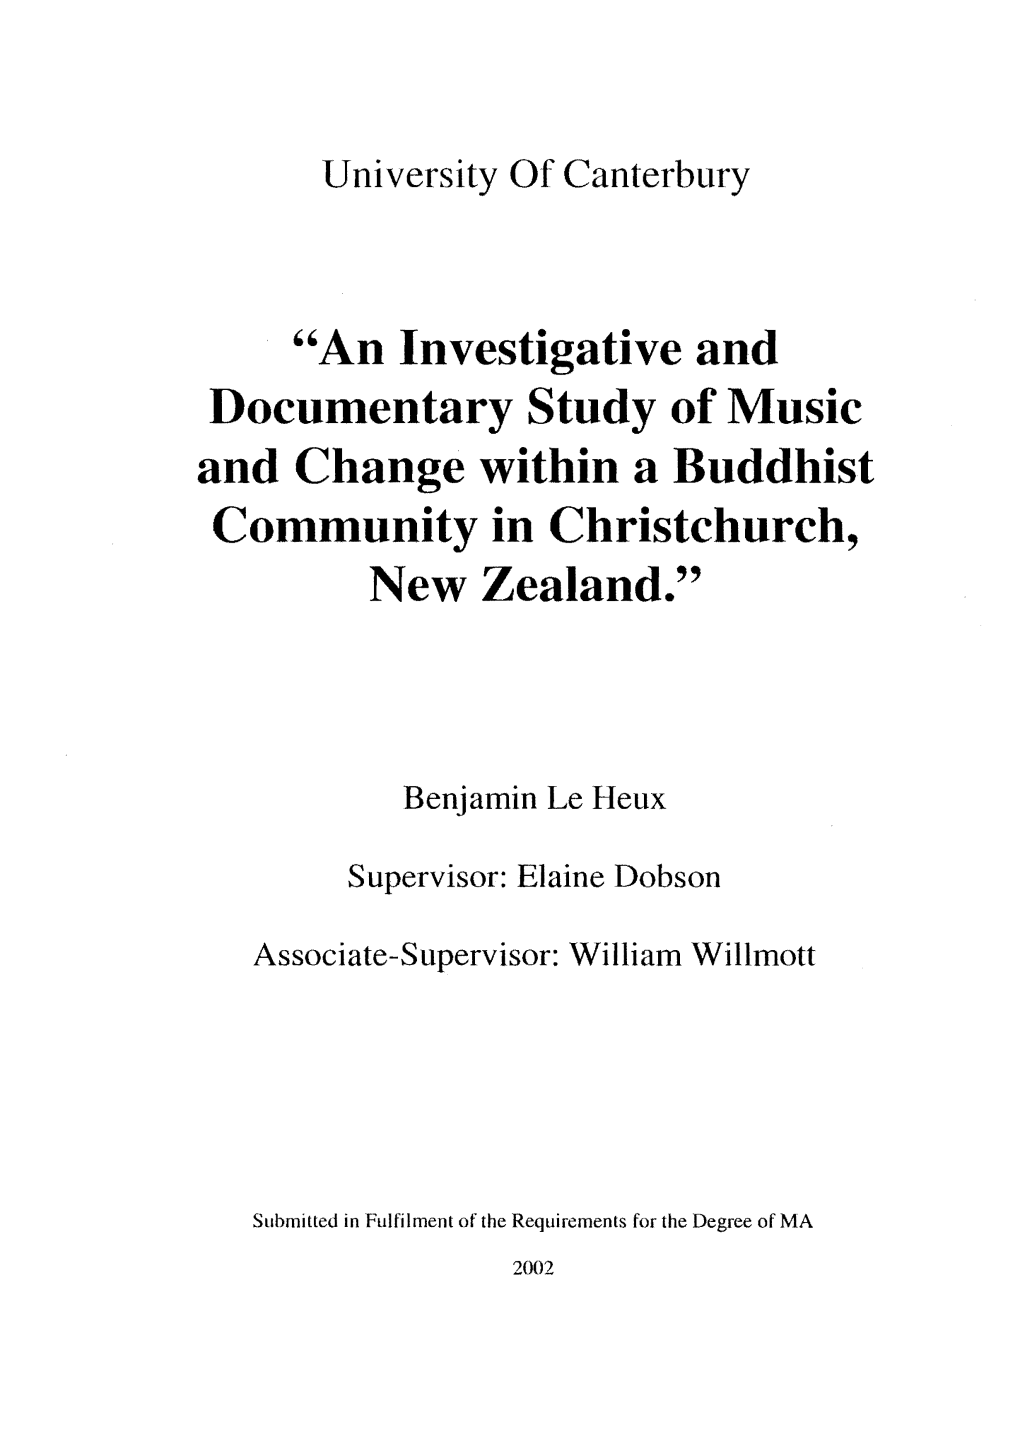 An Investigative and Documentary Study of Music and Change Within a Buddhist Community in Christchurch, New Zealand."